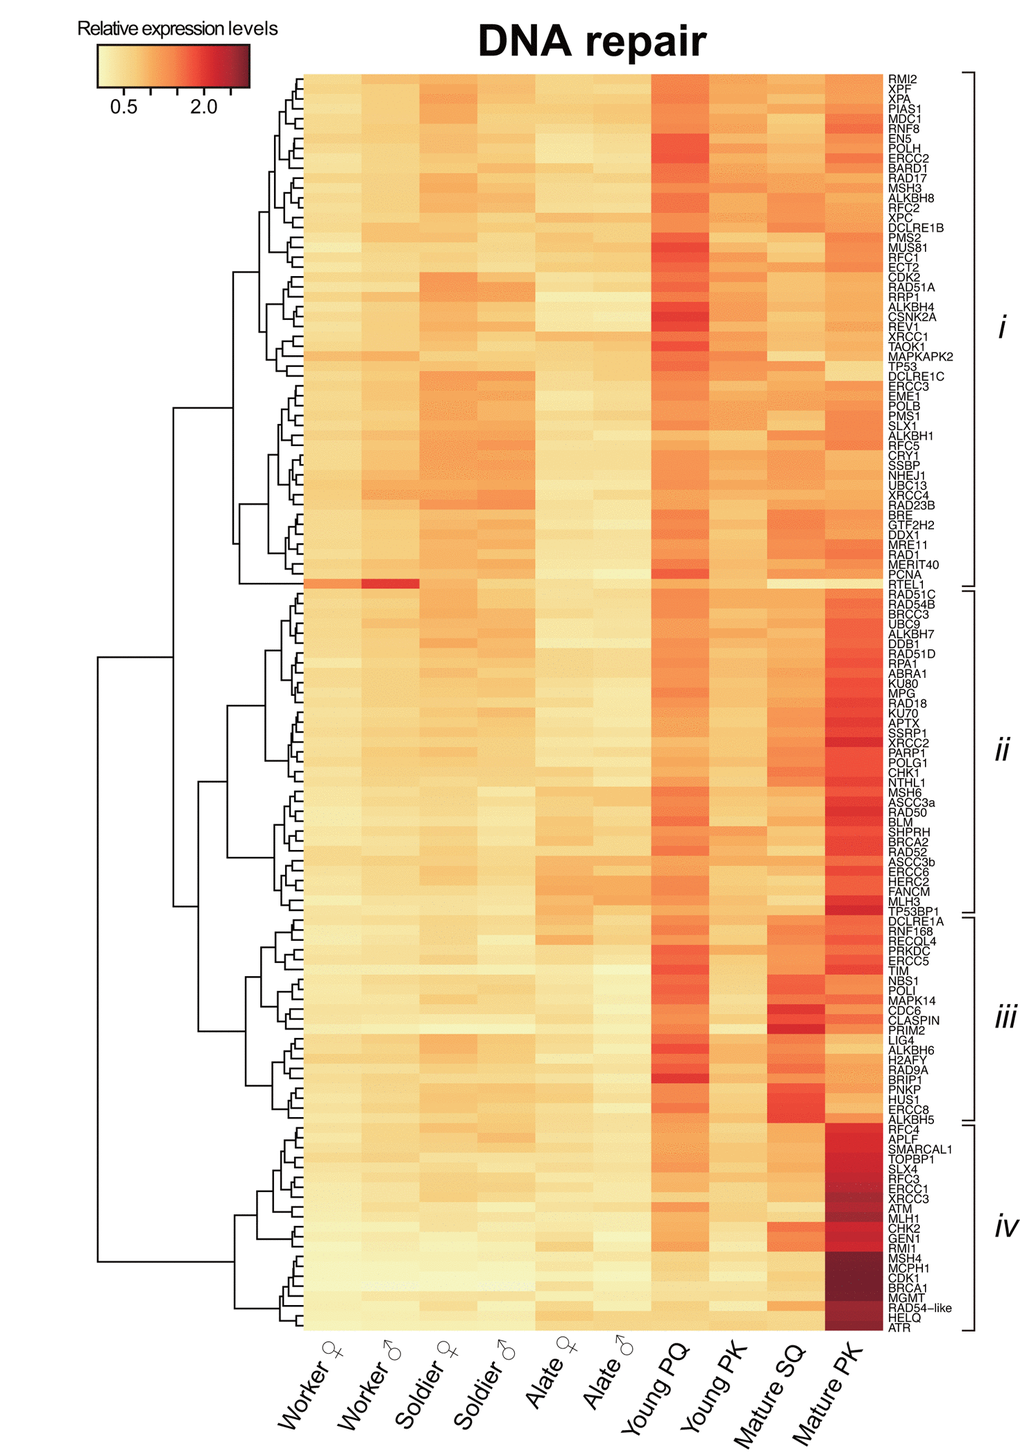 Differential transcriptome analysis of DNA repair genes among castes. The heatmap shows the differential expression of 127 DNA repair transcripts among castes in Reticulitermes speratus. Workers and soldiers are non-reproductive individuals. Alates, young primary queens (PQs) and primary kings (PKs), and mature secondary queens (SQs) and PKs are reproductives. After nuptial flight, a pair of female and male alates establishes a new colony and starts to produce offspring sexually as a PQ and PK, respectively. The relative expression level is indicated by the mean normalized count per million, ranging from white to red. The tree at the left corresponds to the hierarchical clustering of cluster-averaged expression (clusters i–iv).